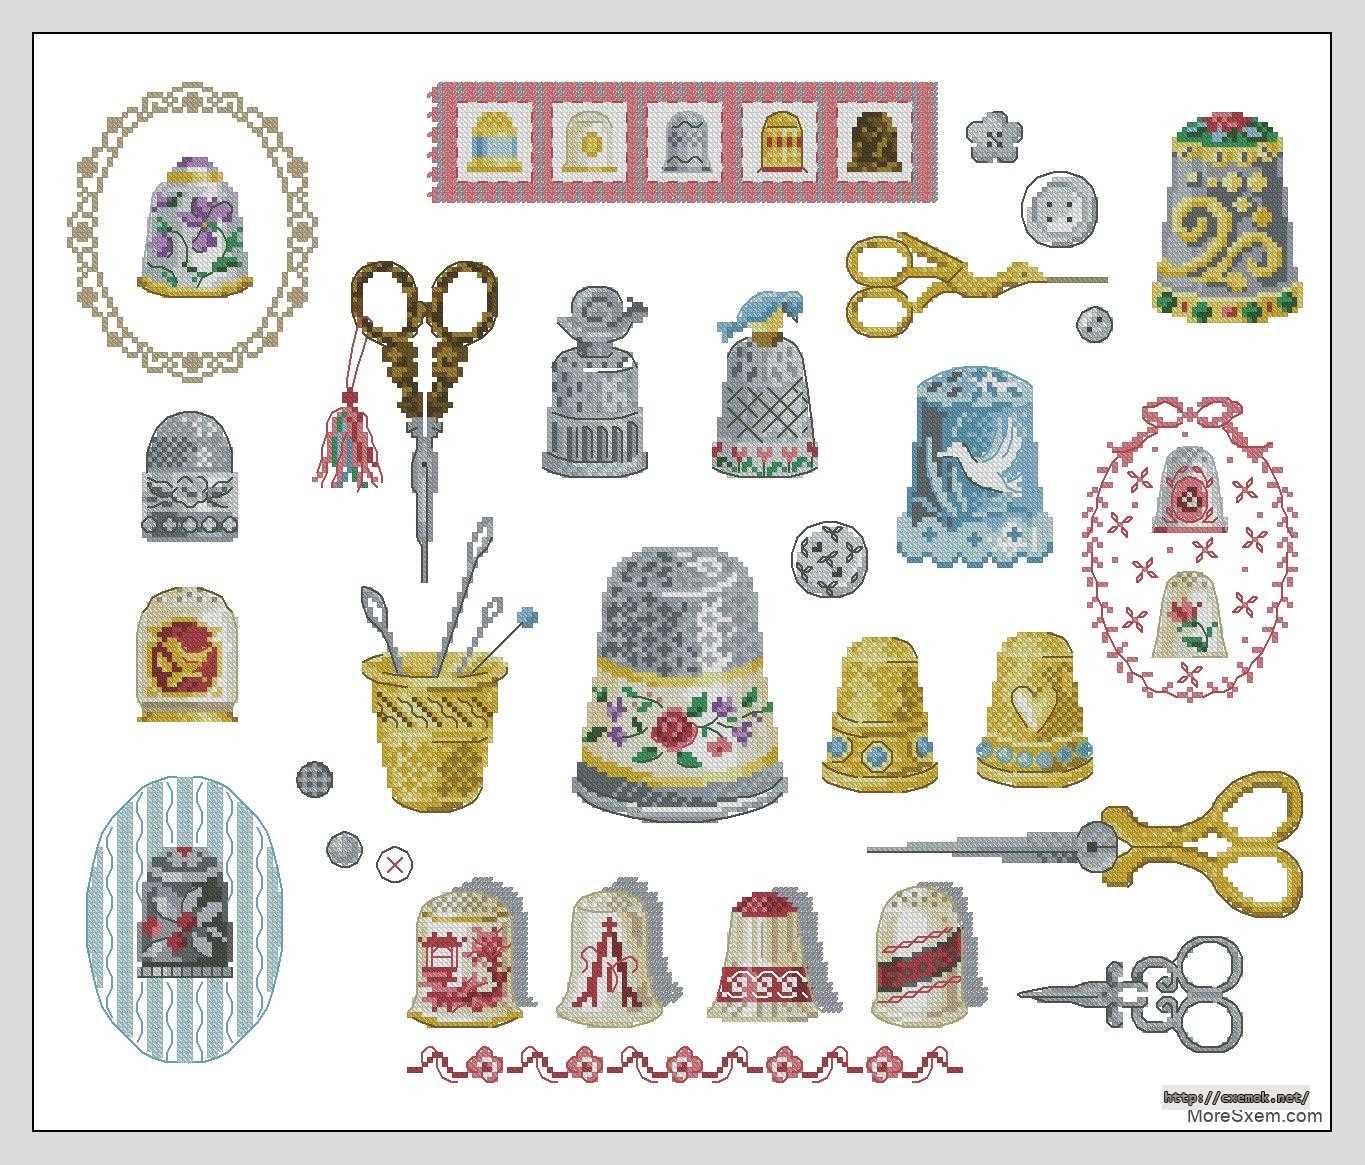 Download embroidery patterns by cross-stitch  - Принадлежности для рукоделия